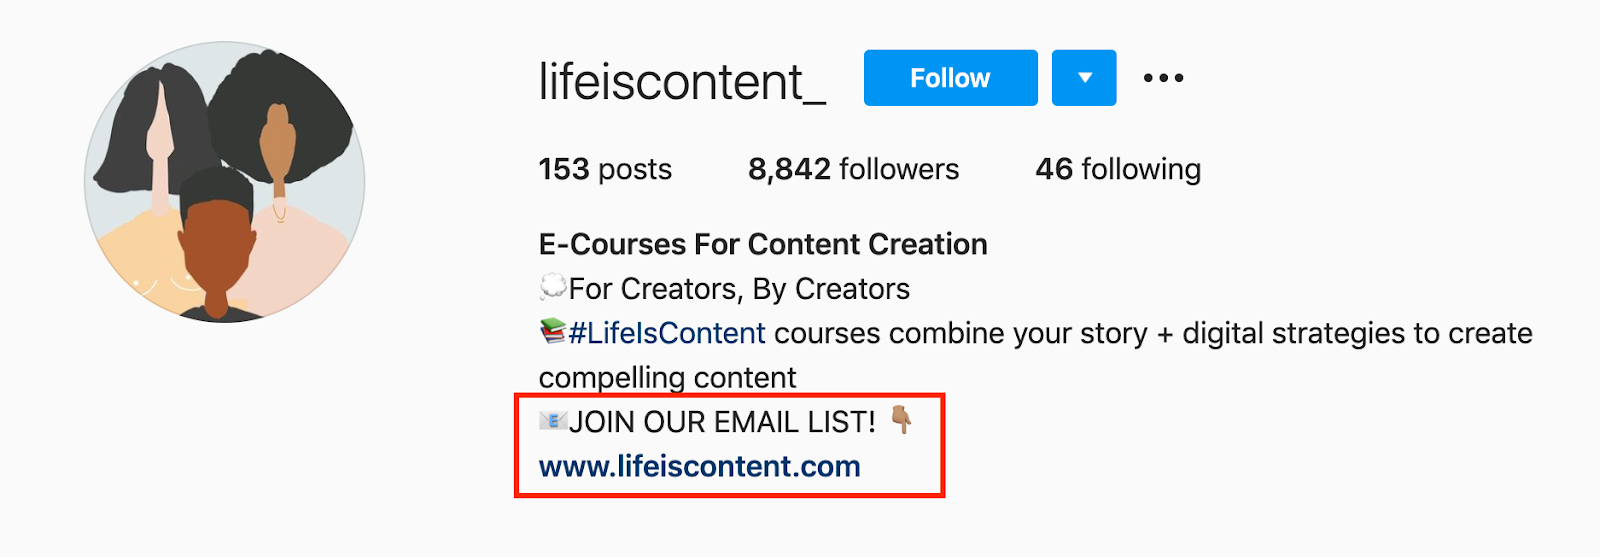 How to Grow Your Email List With Instagram [With Examples]